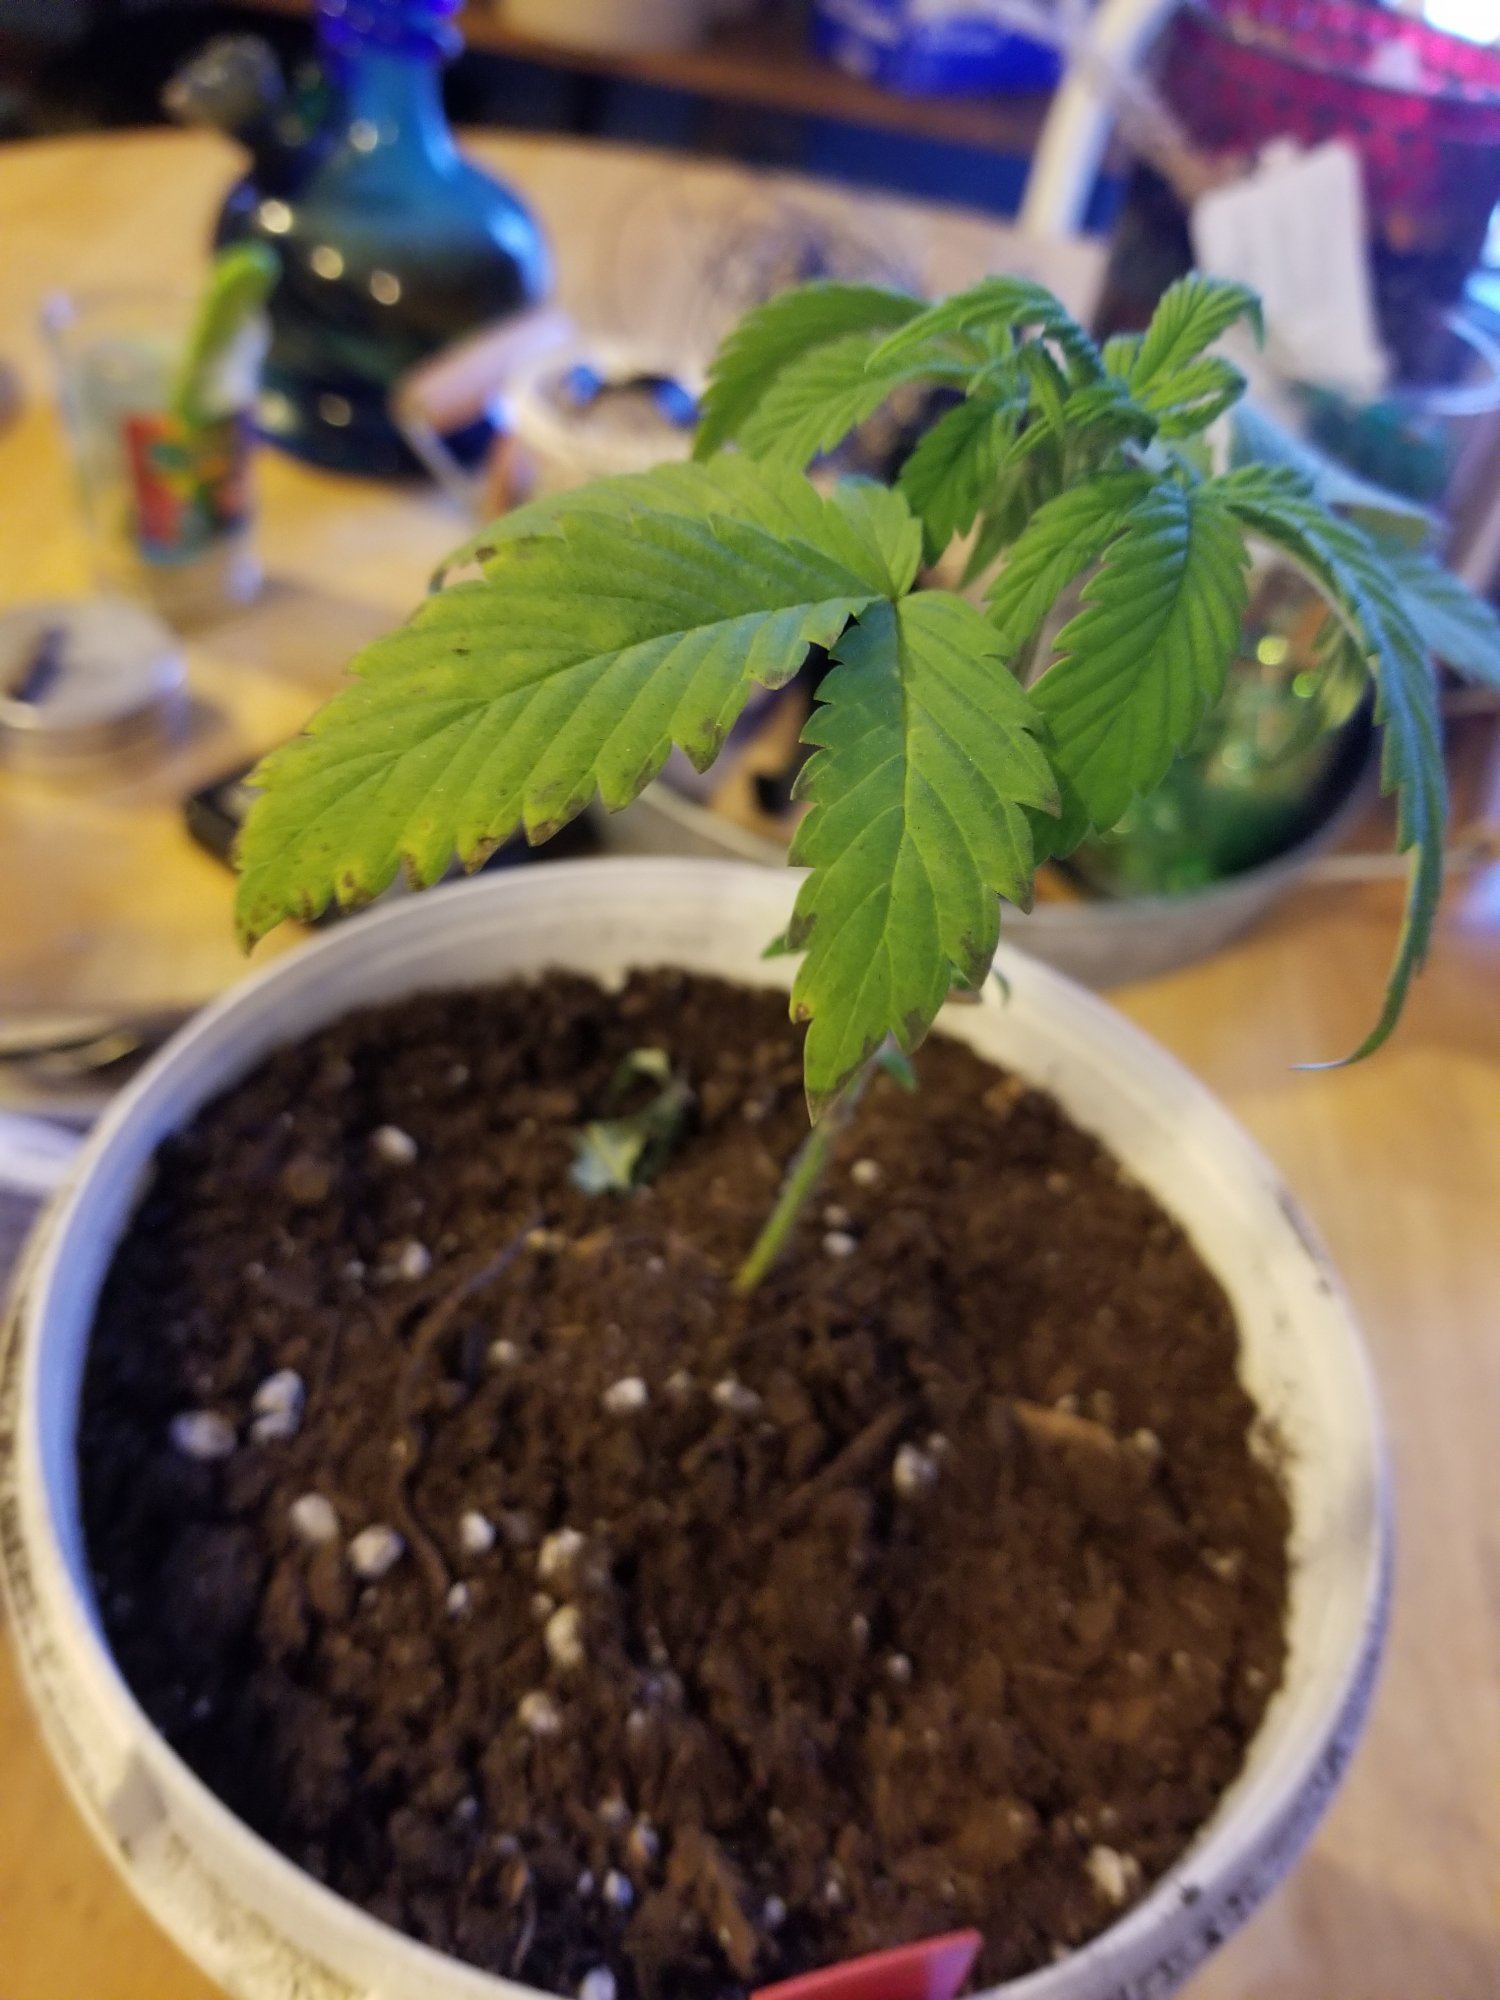 Help me please all of a sudden my bottom leaves started to die off 4